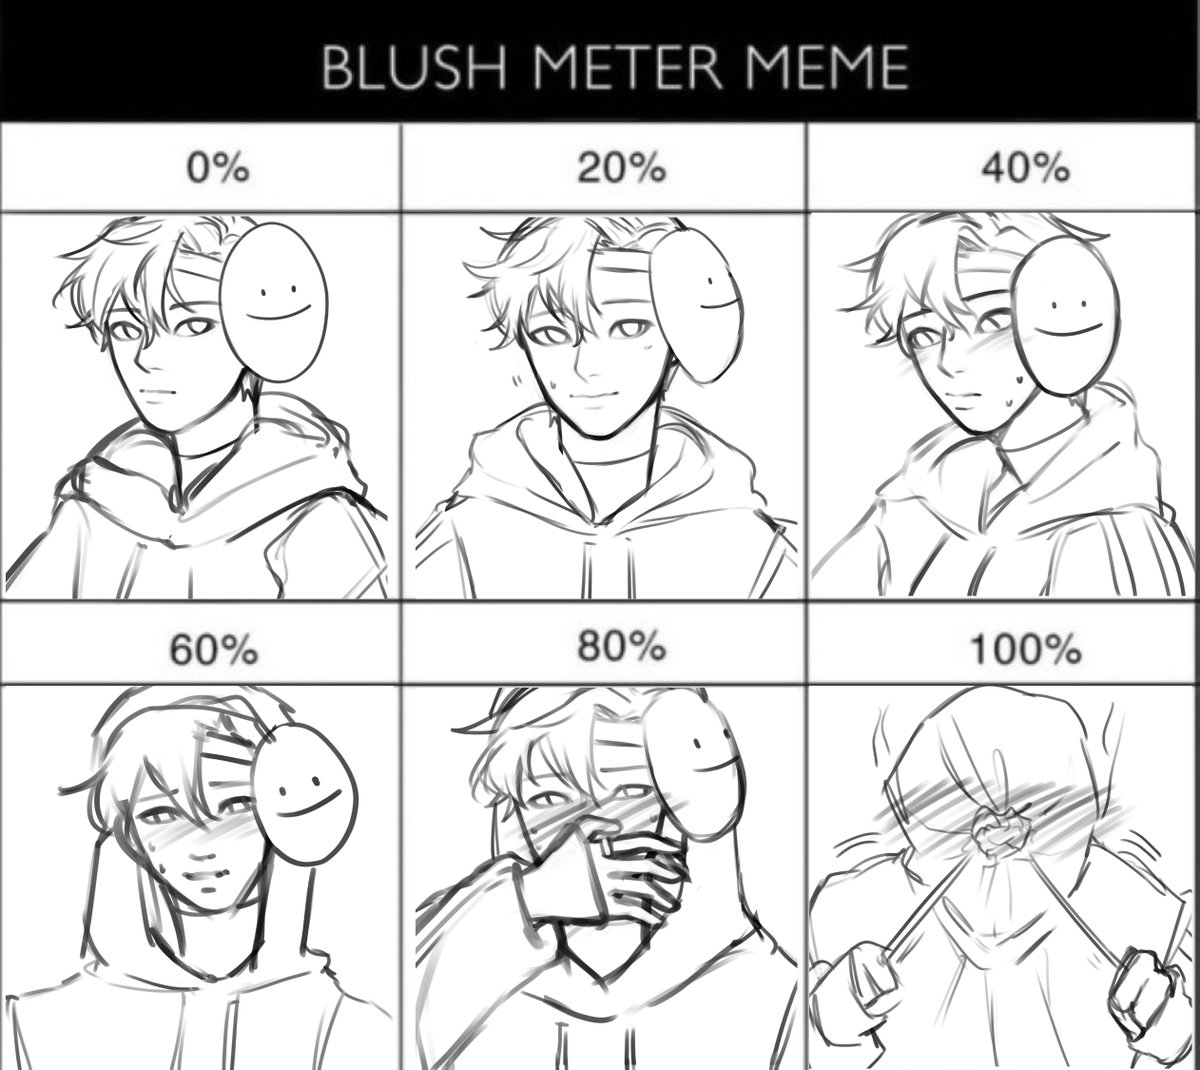 blush meme i might finish this, i might not, but its here rts appreciated.